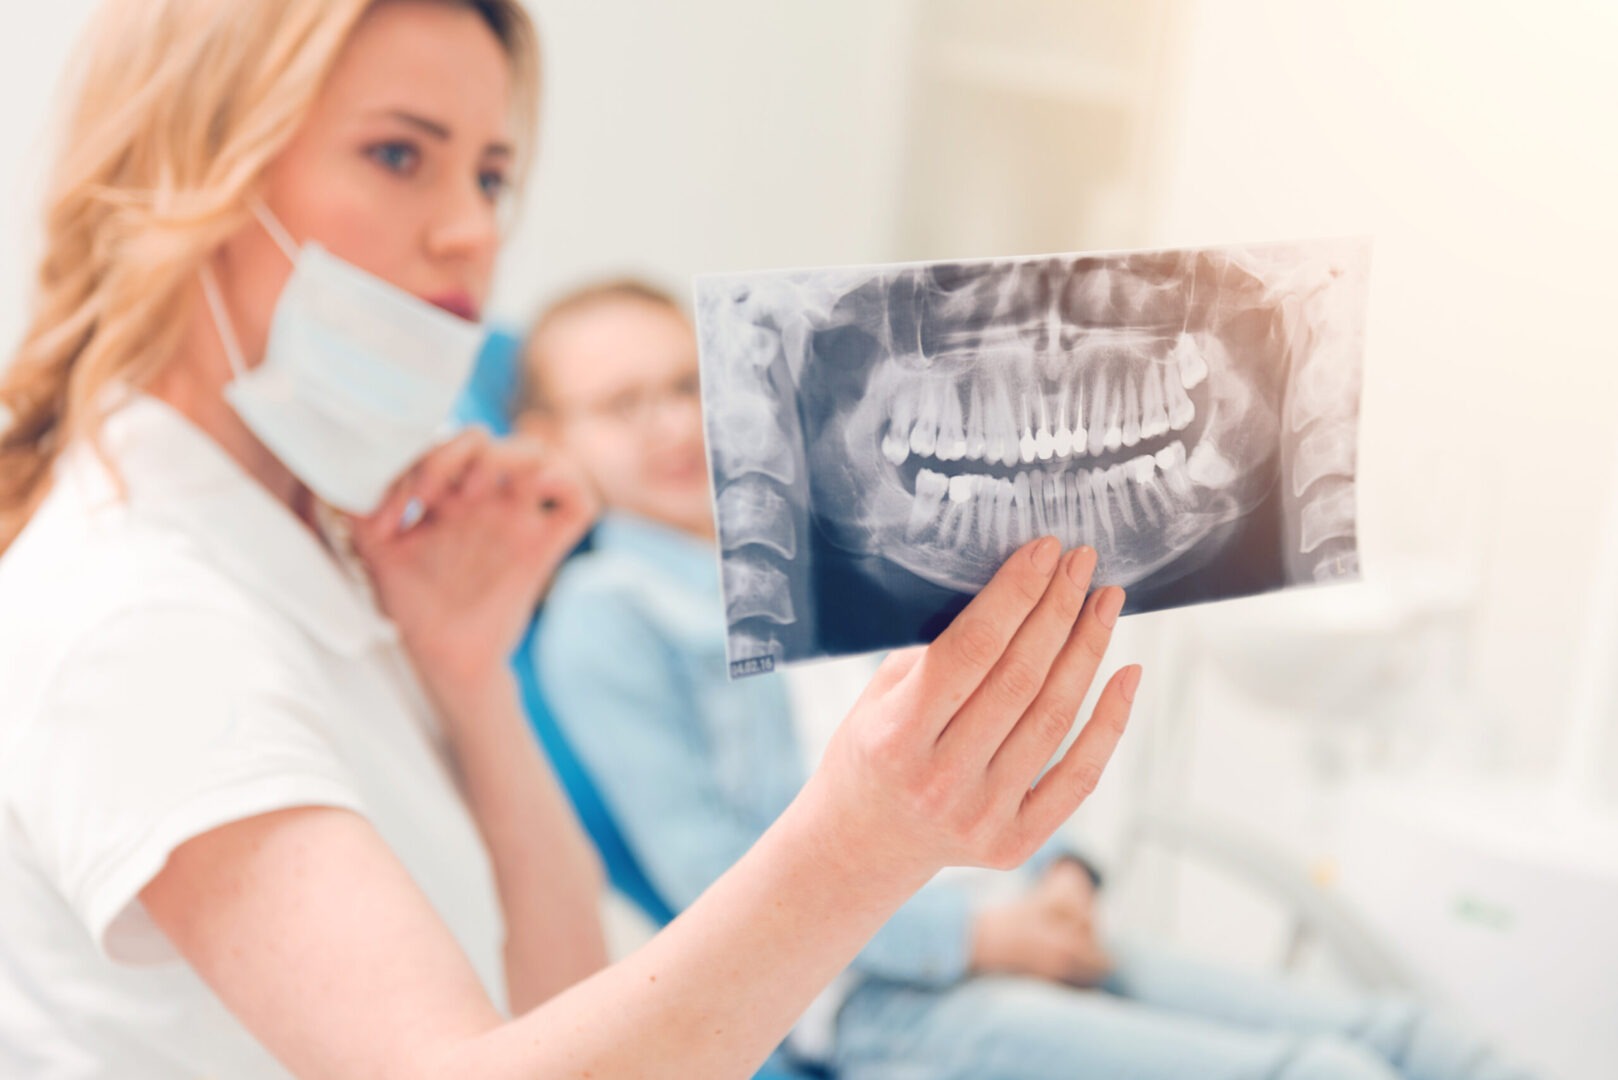 wisdom teeth removal xray at Aspire Surgical in Salt Lake City, UT